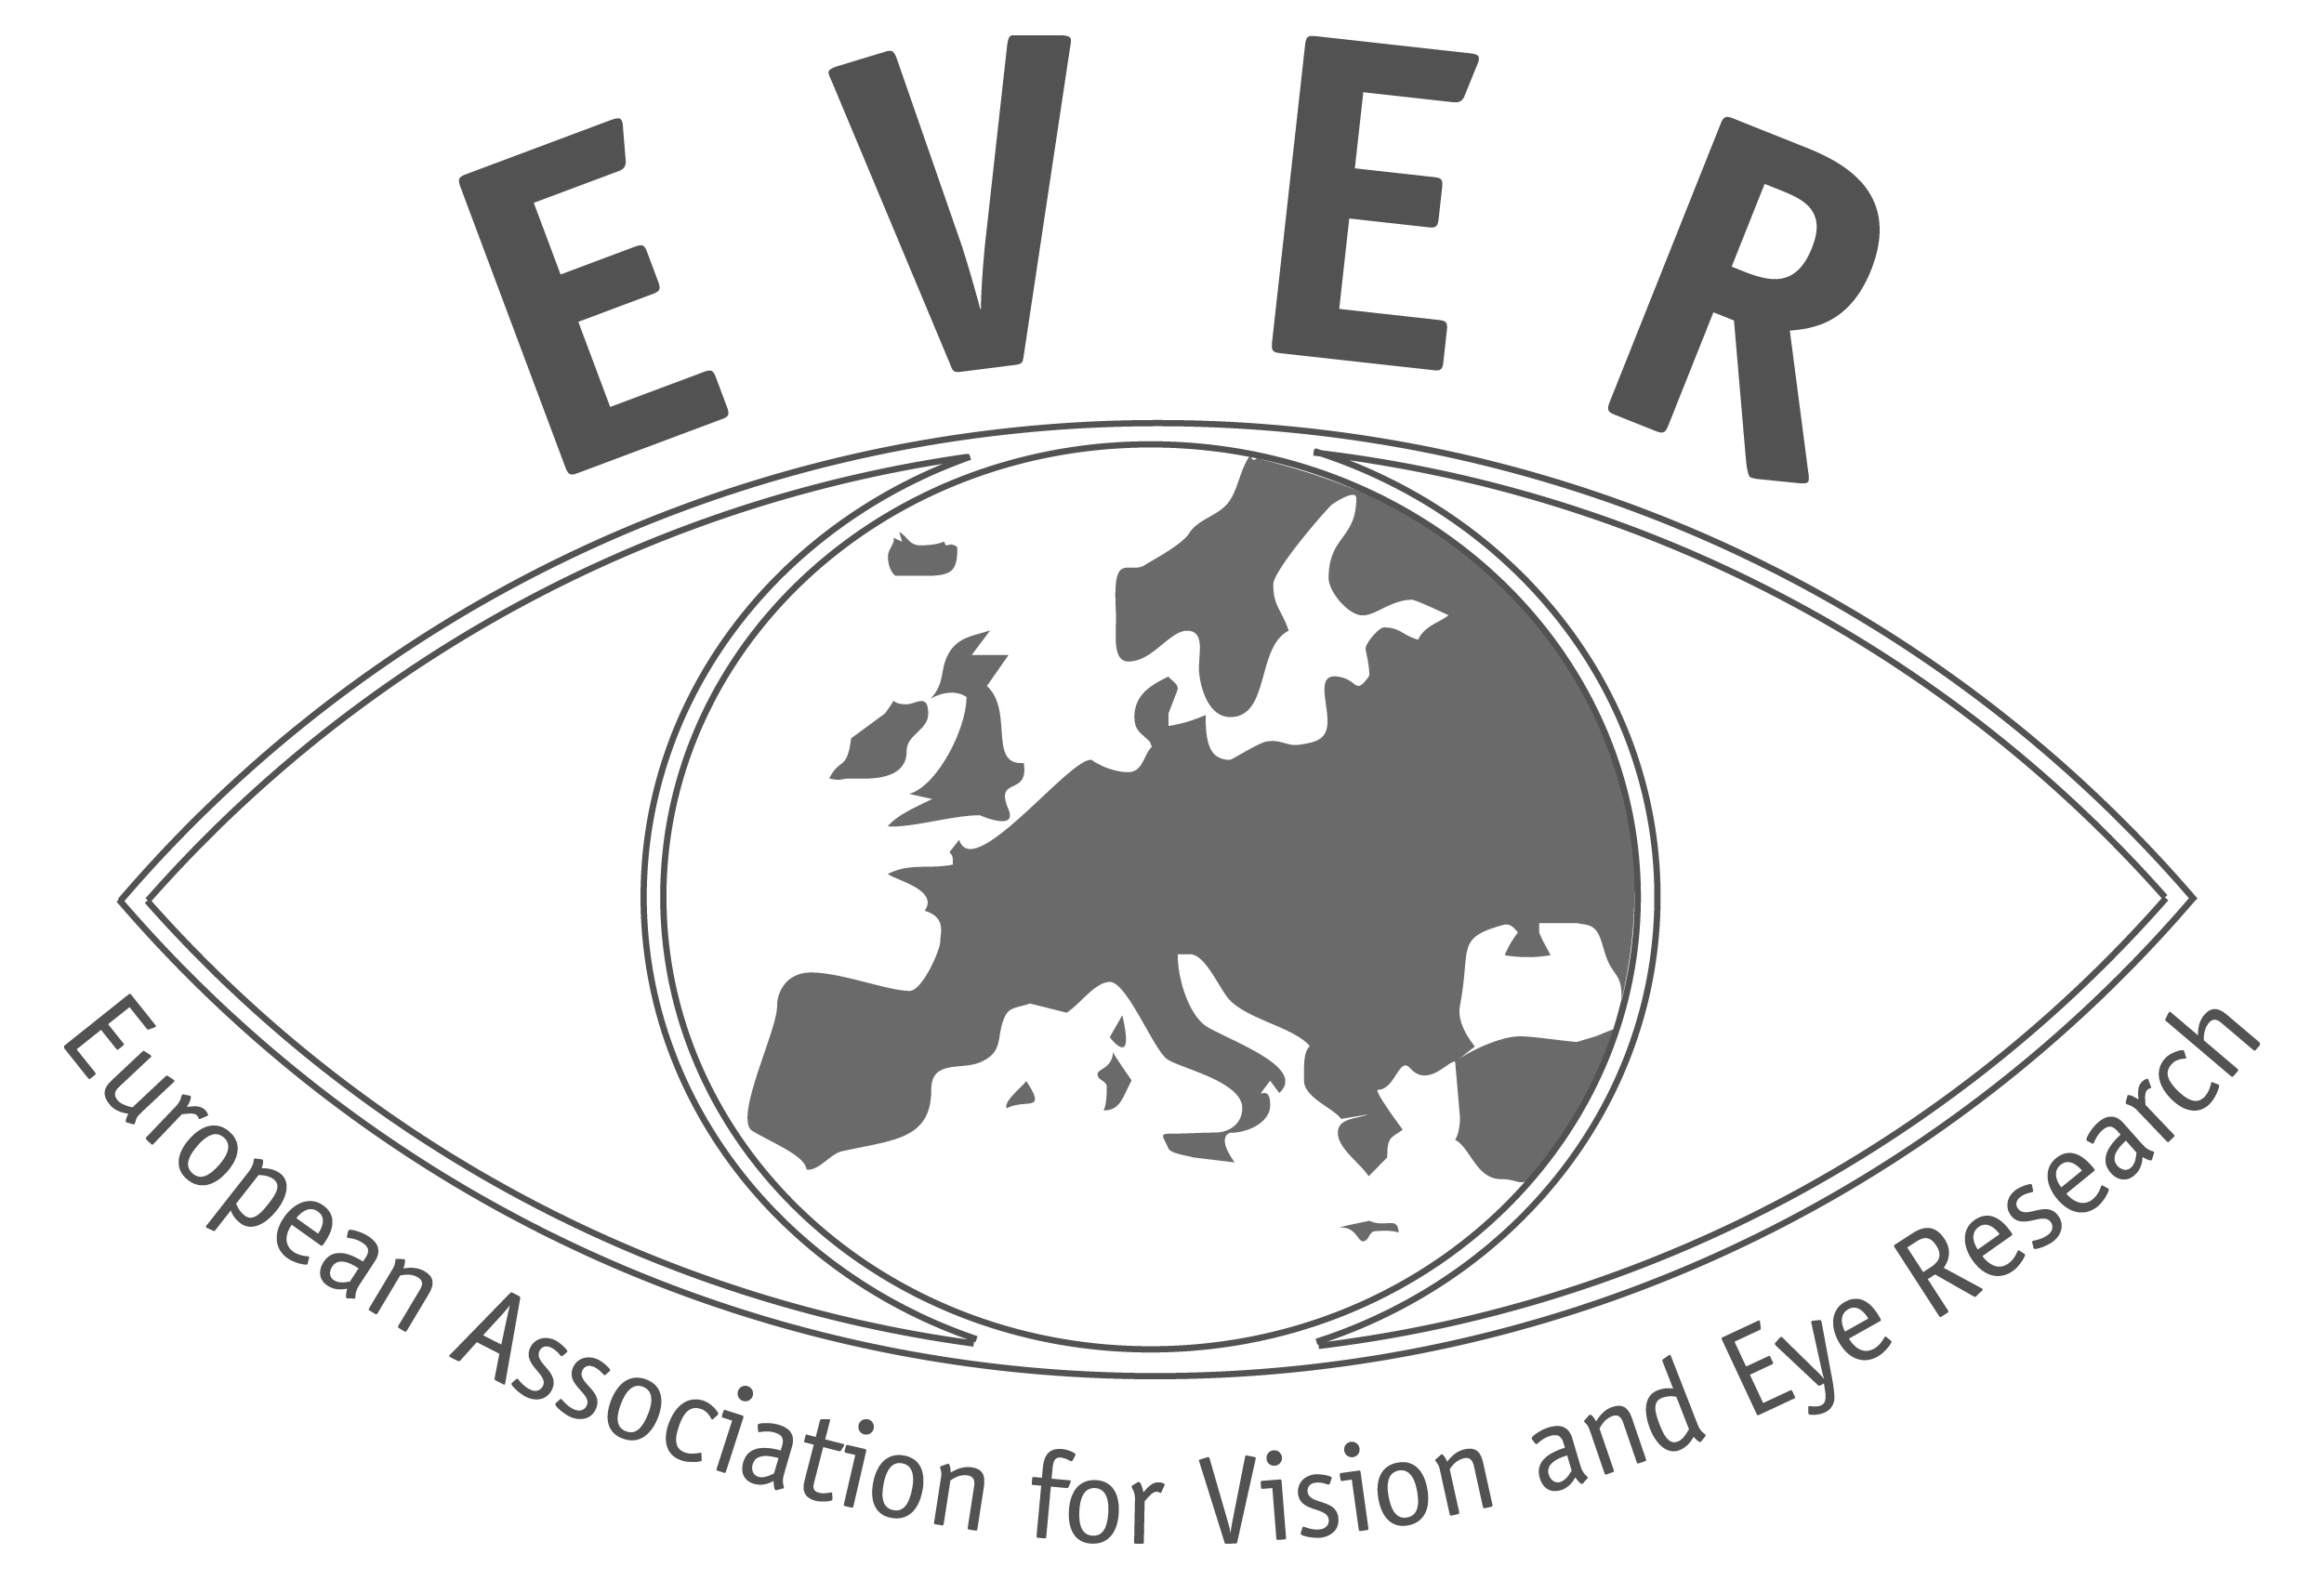 European Association for Vision and Eye Research